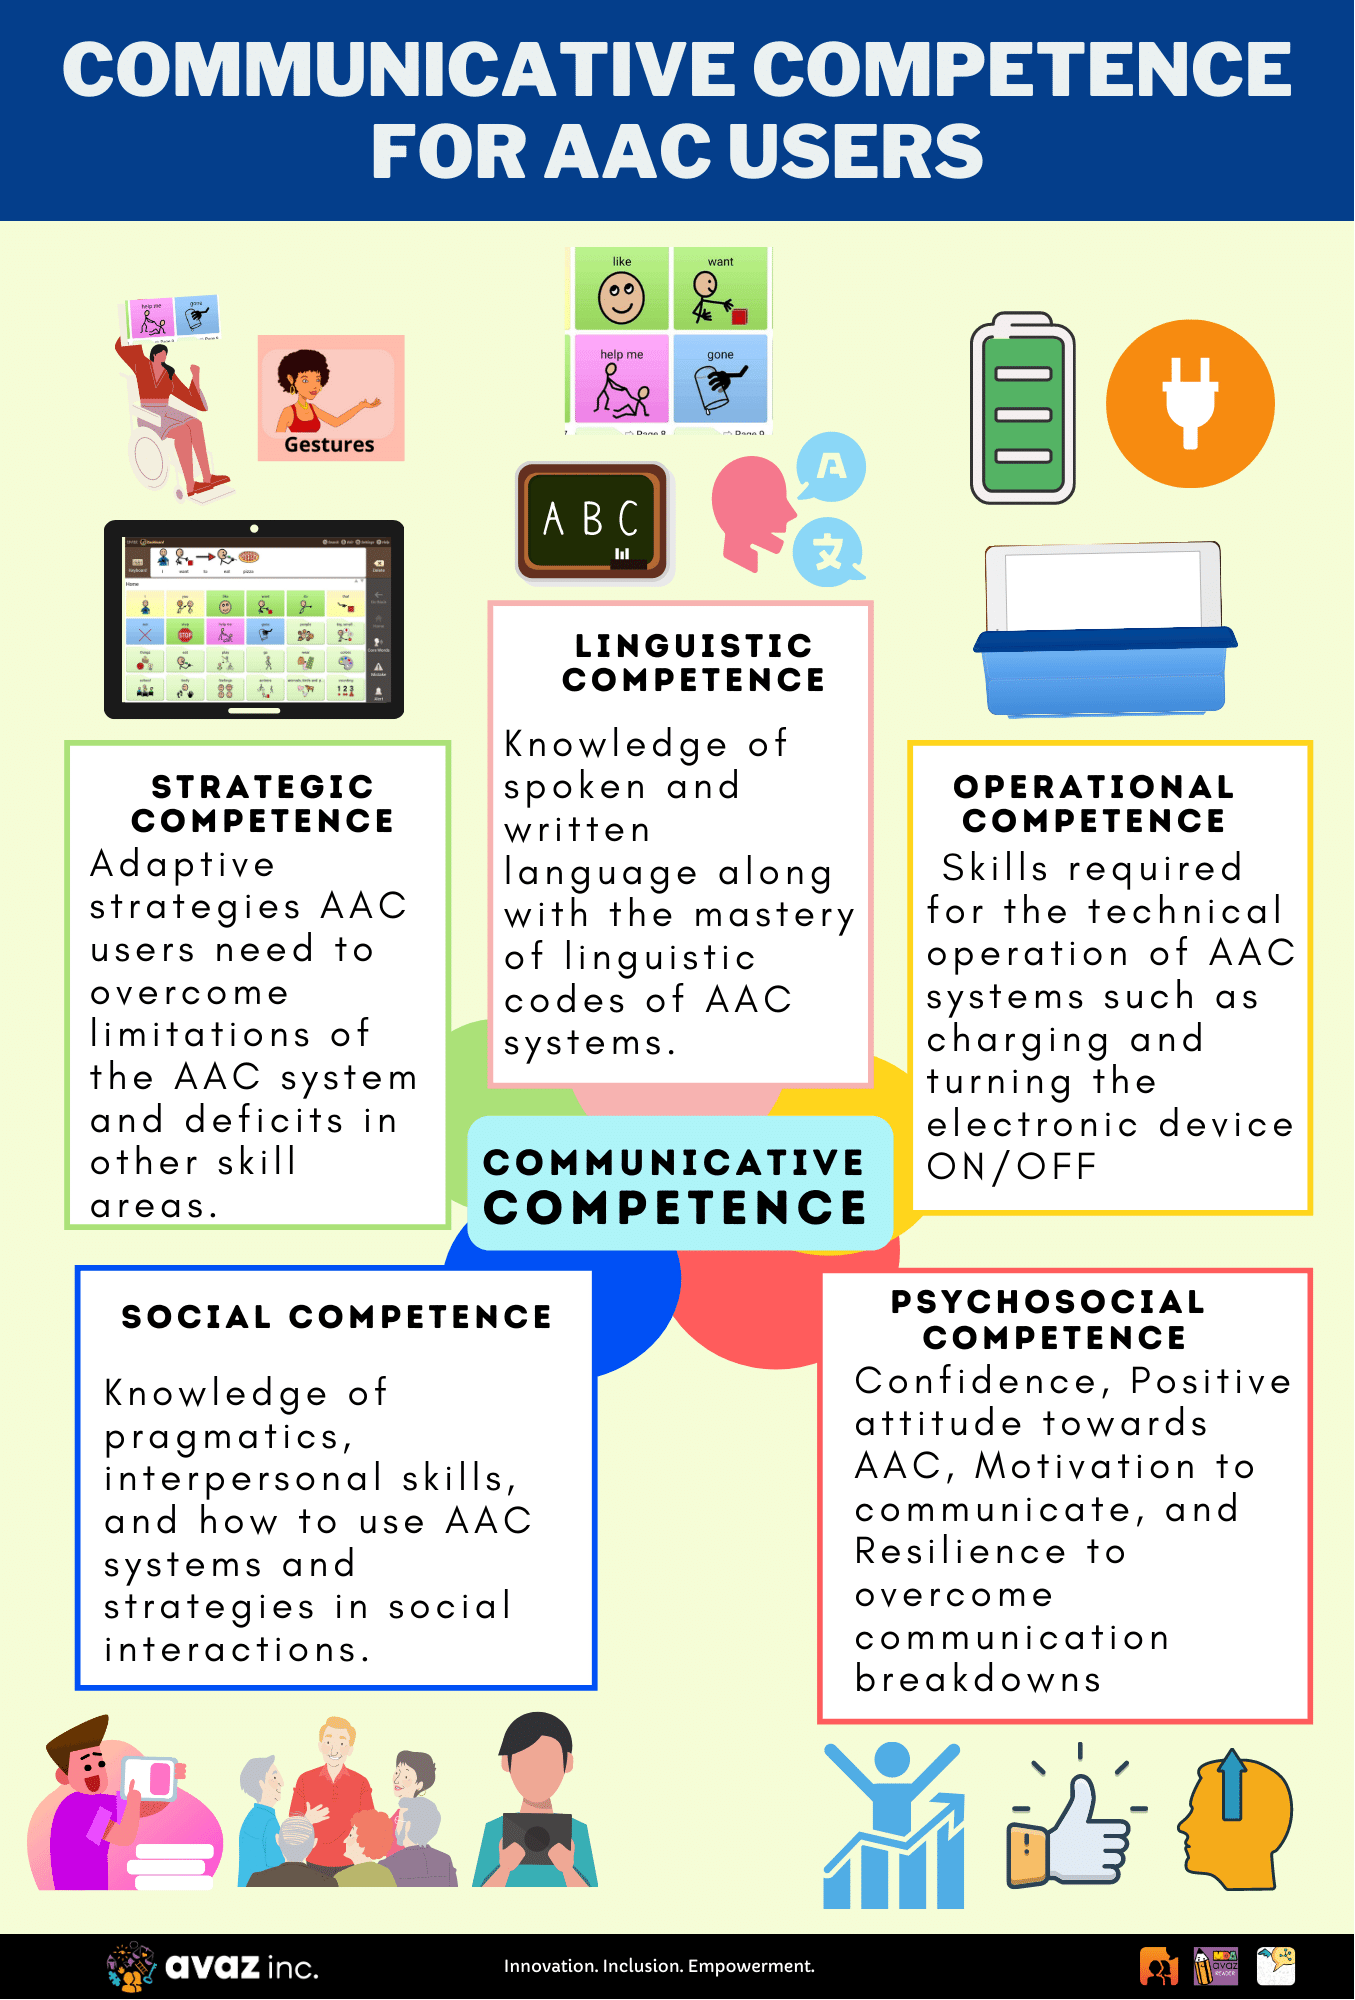 understanding-communicative-competence-for-aac-users-avaz-inc